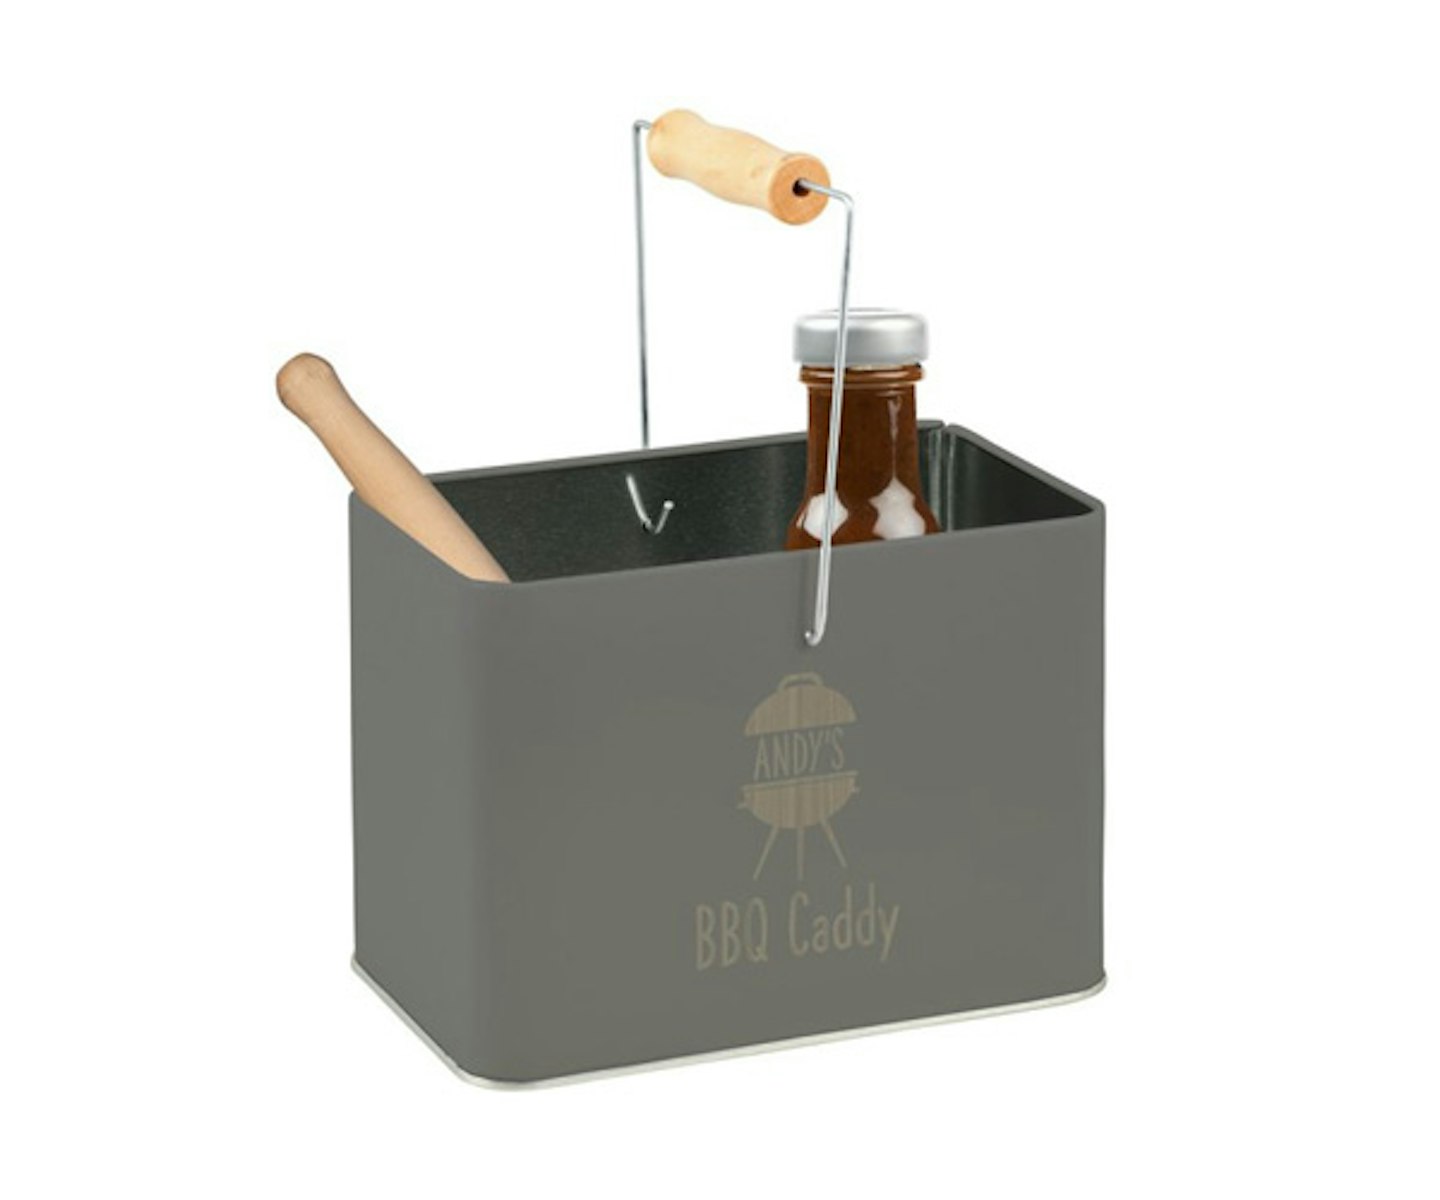 PERSONALISED BBQ CADDY